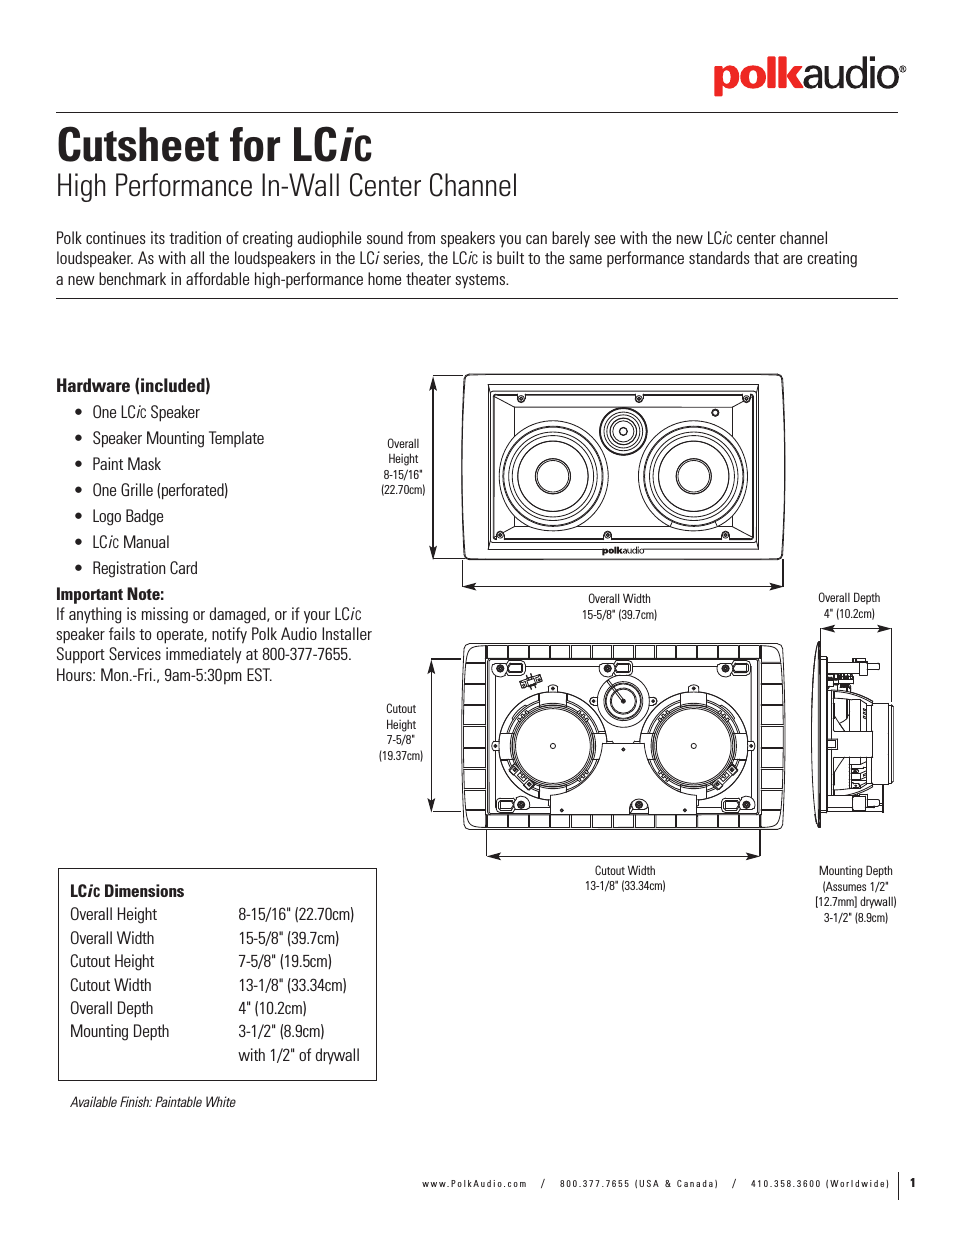 High Performance In-Wall Center Channel